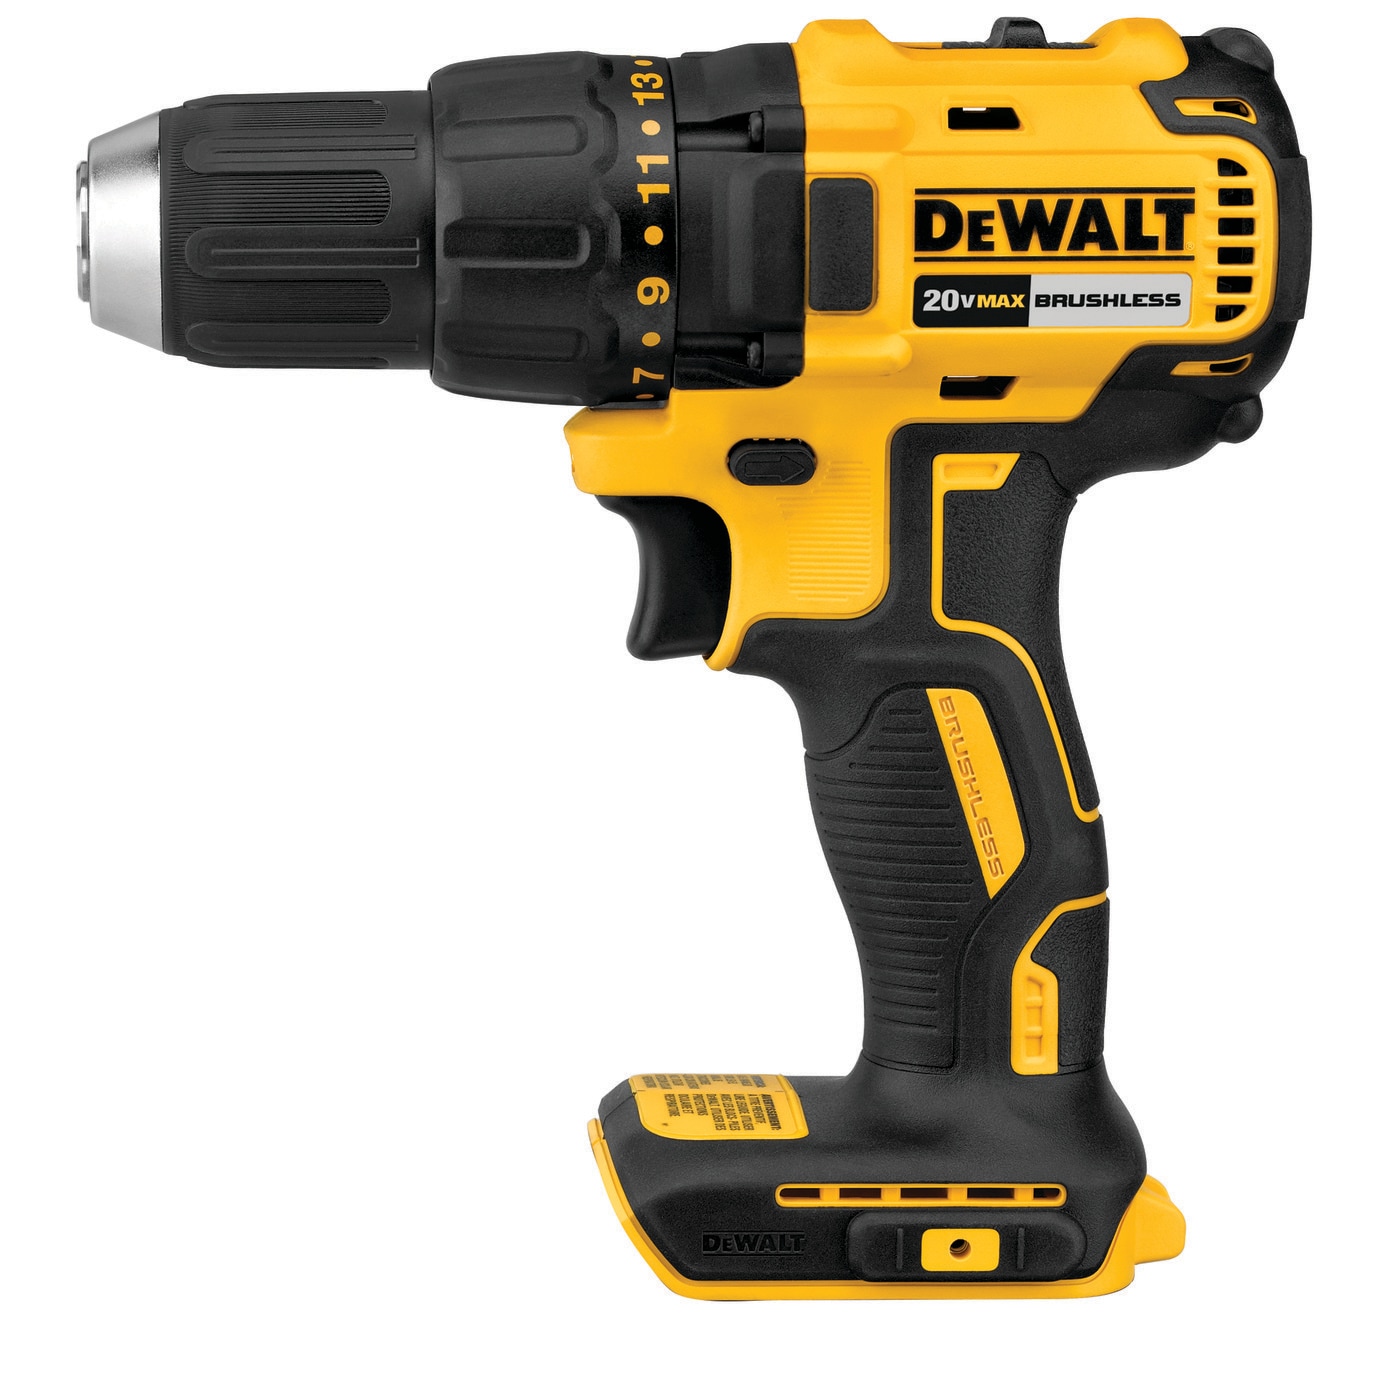 DEWALT Max 1/2-in Brushless Cordless Drill (Bare Tool) in department at Lowes.com